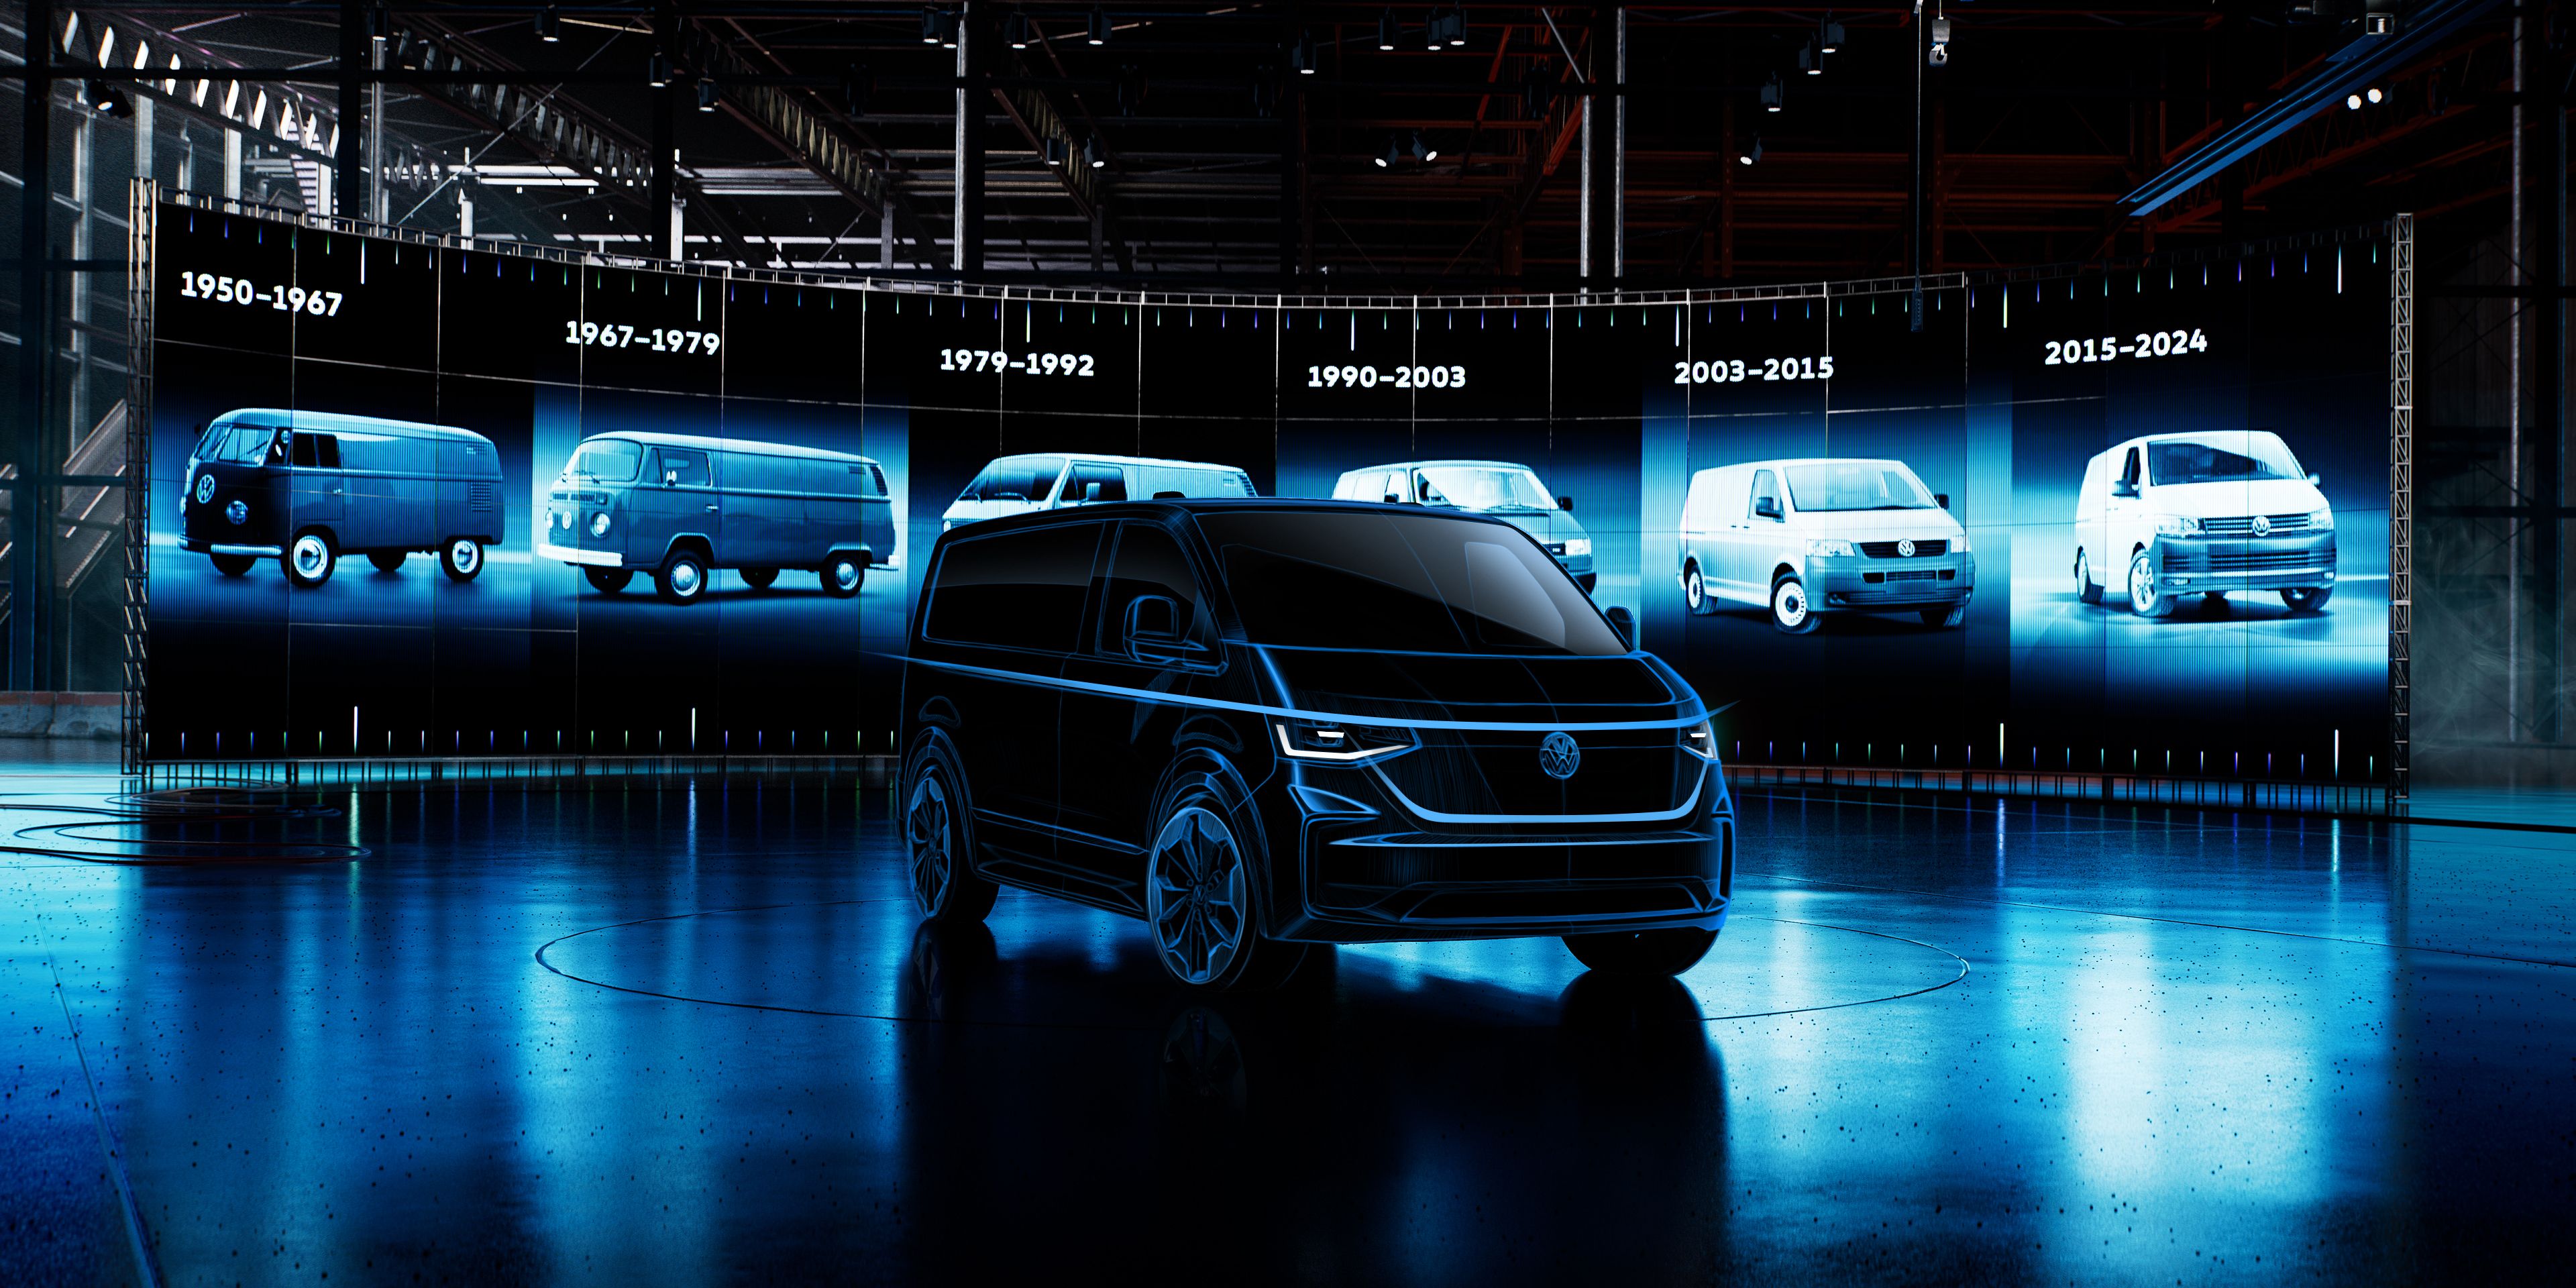 Here's the Next VW Van, Which America Still Does Not Get